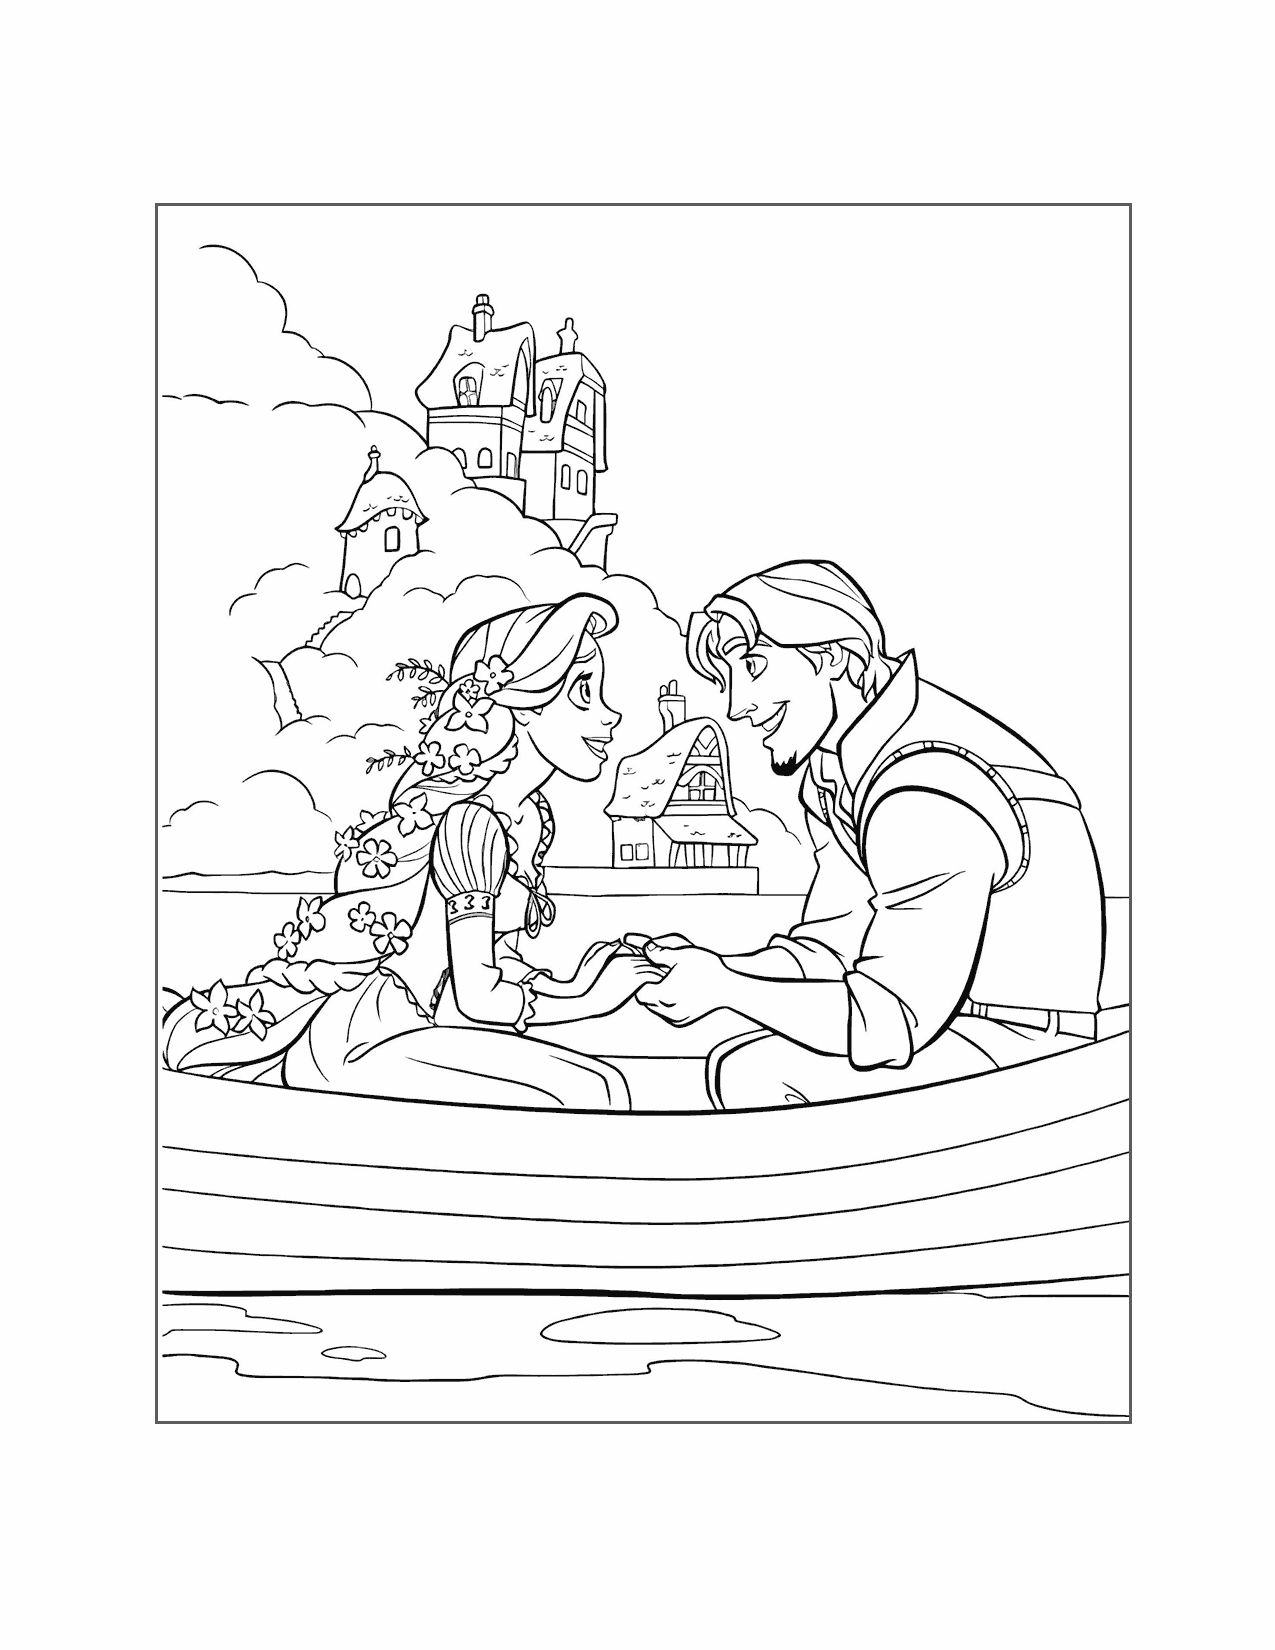 Rapunzel And Flynn On The Boat Coloring Page